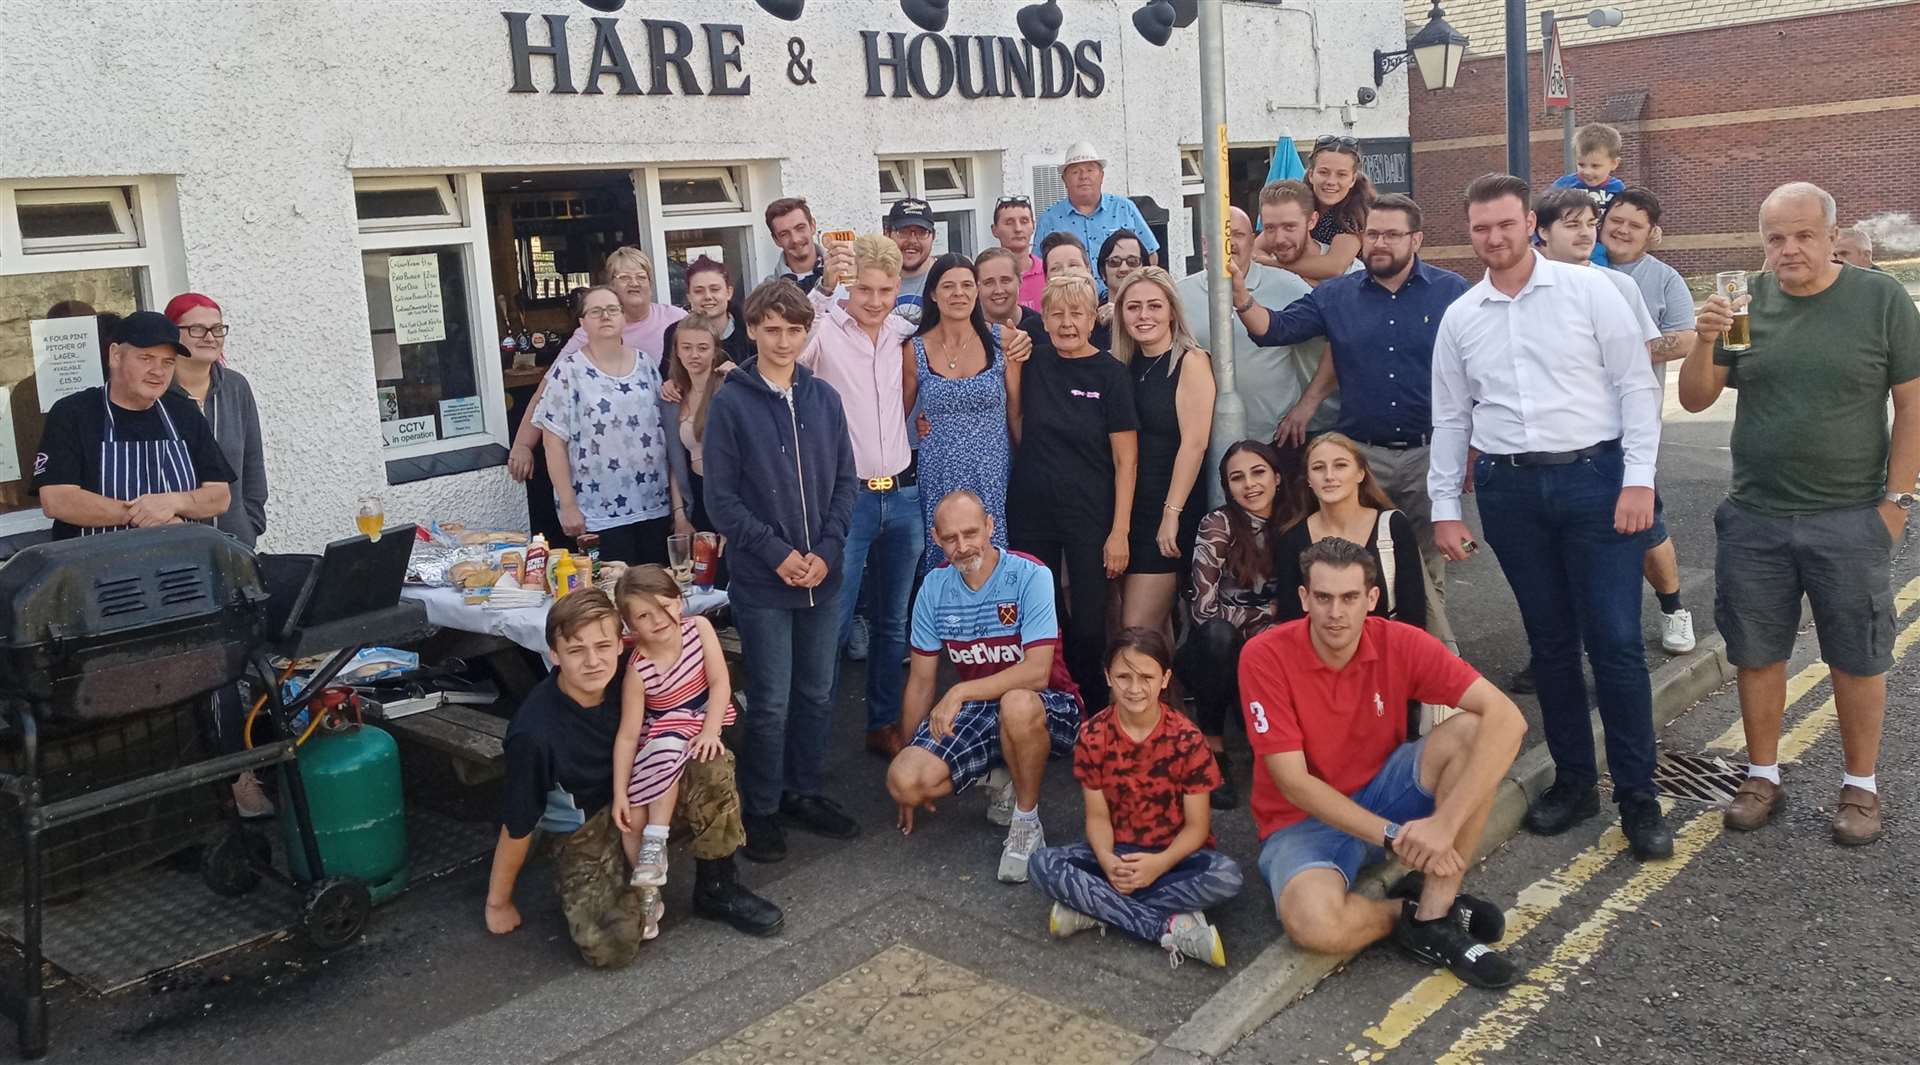 A BBQ at the Hare and Hounds in memory of Andrew (Kev) Looseley